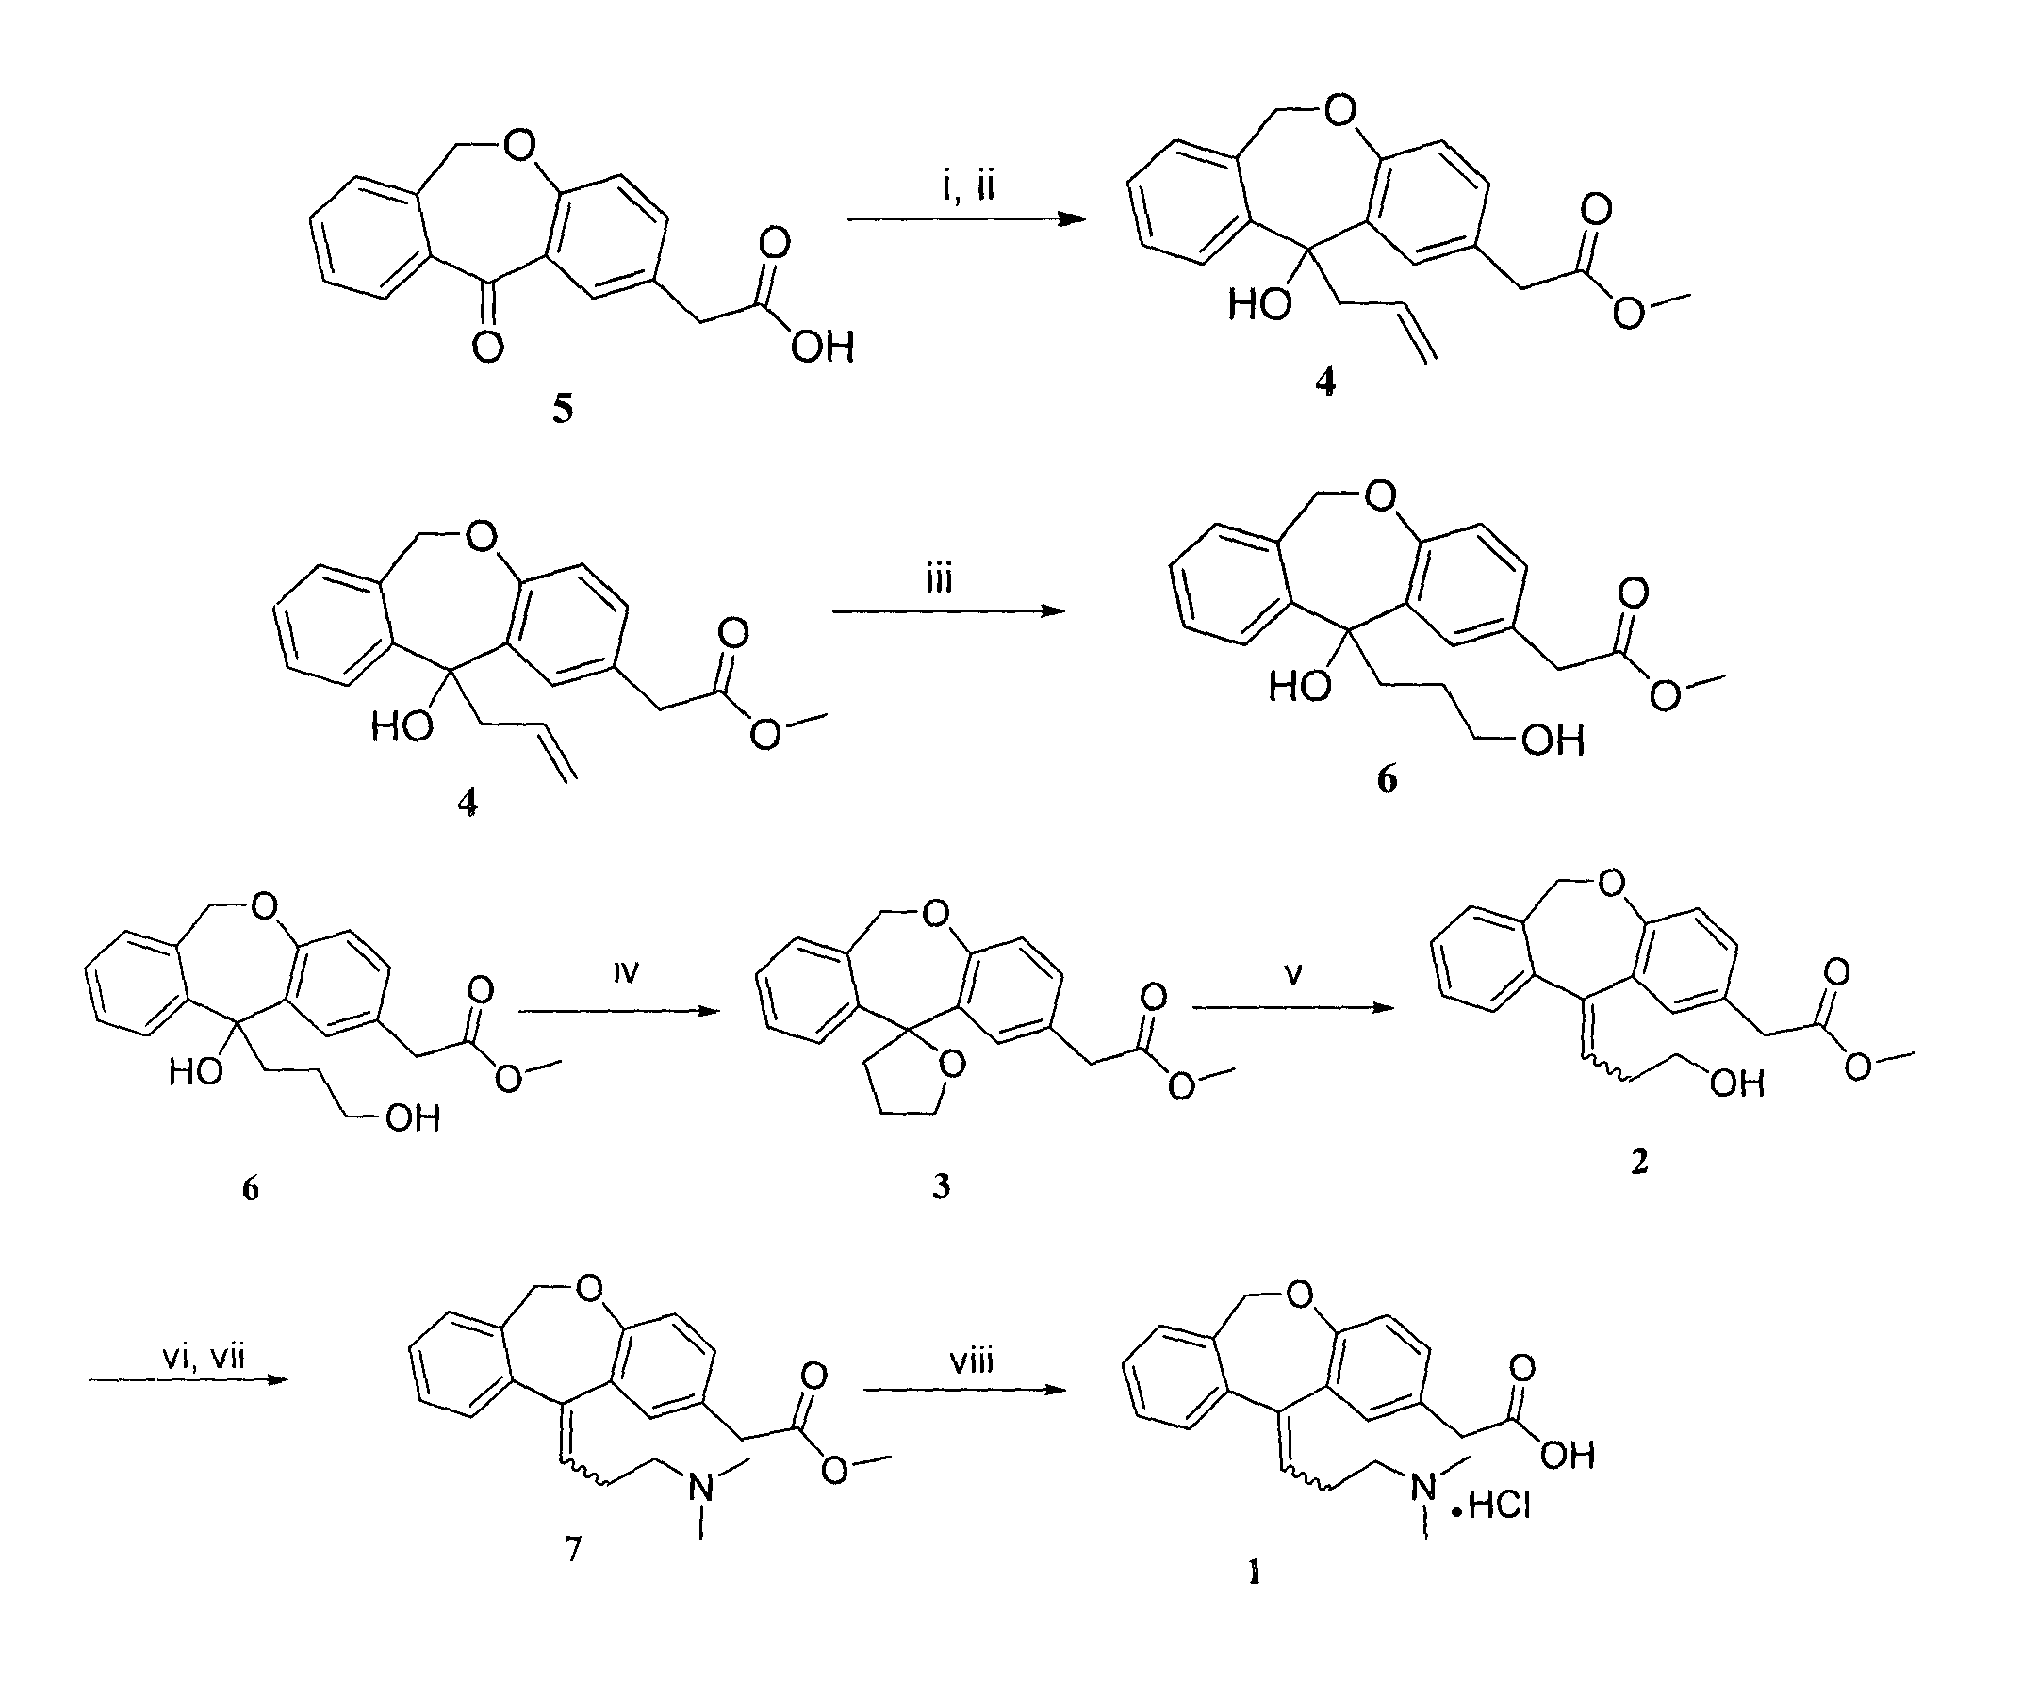 Process for the synthesis of olopatadine